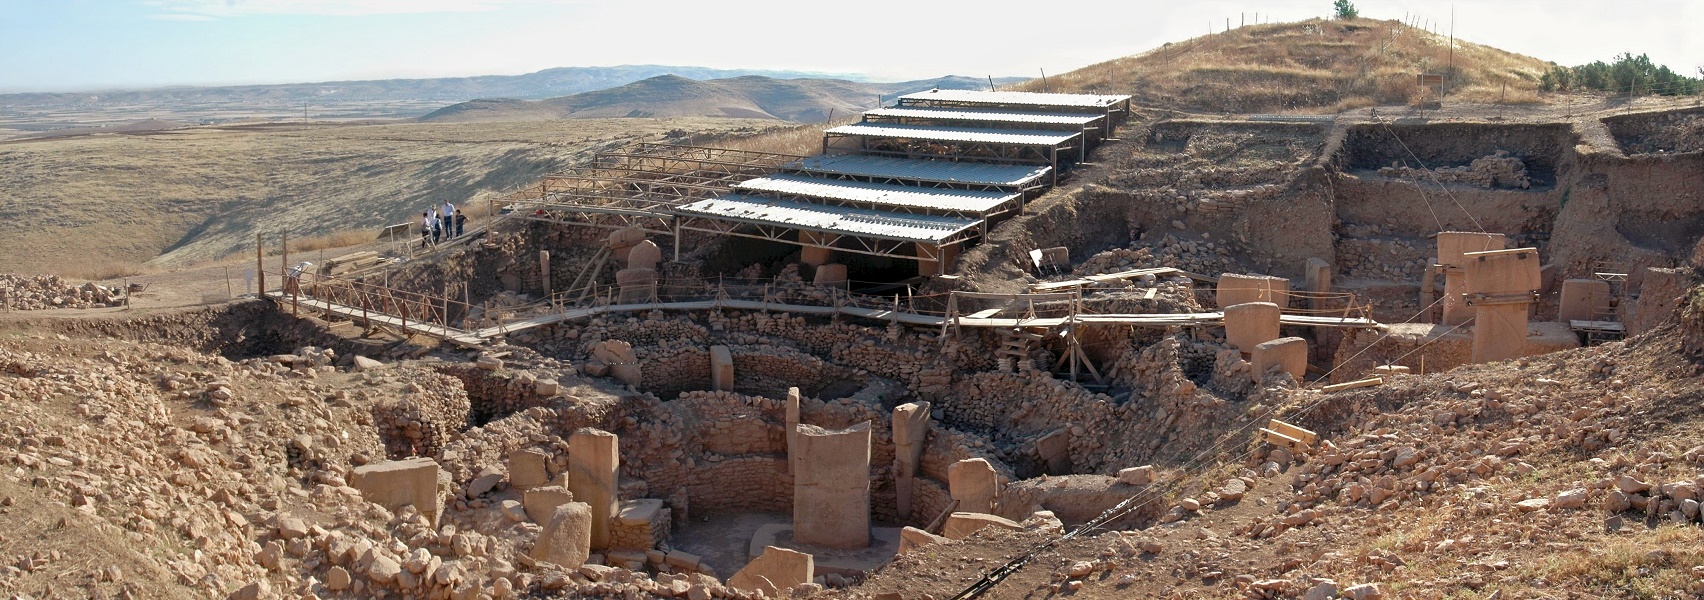  Göbekli Tepe (Turkey): a panoramic view of the southern excavation field. Creative Commons. Credit to Wikipedia user Rolfcosar.